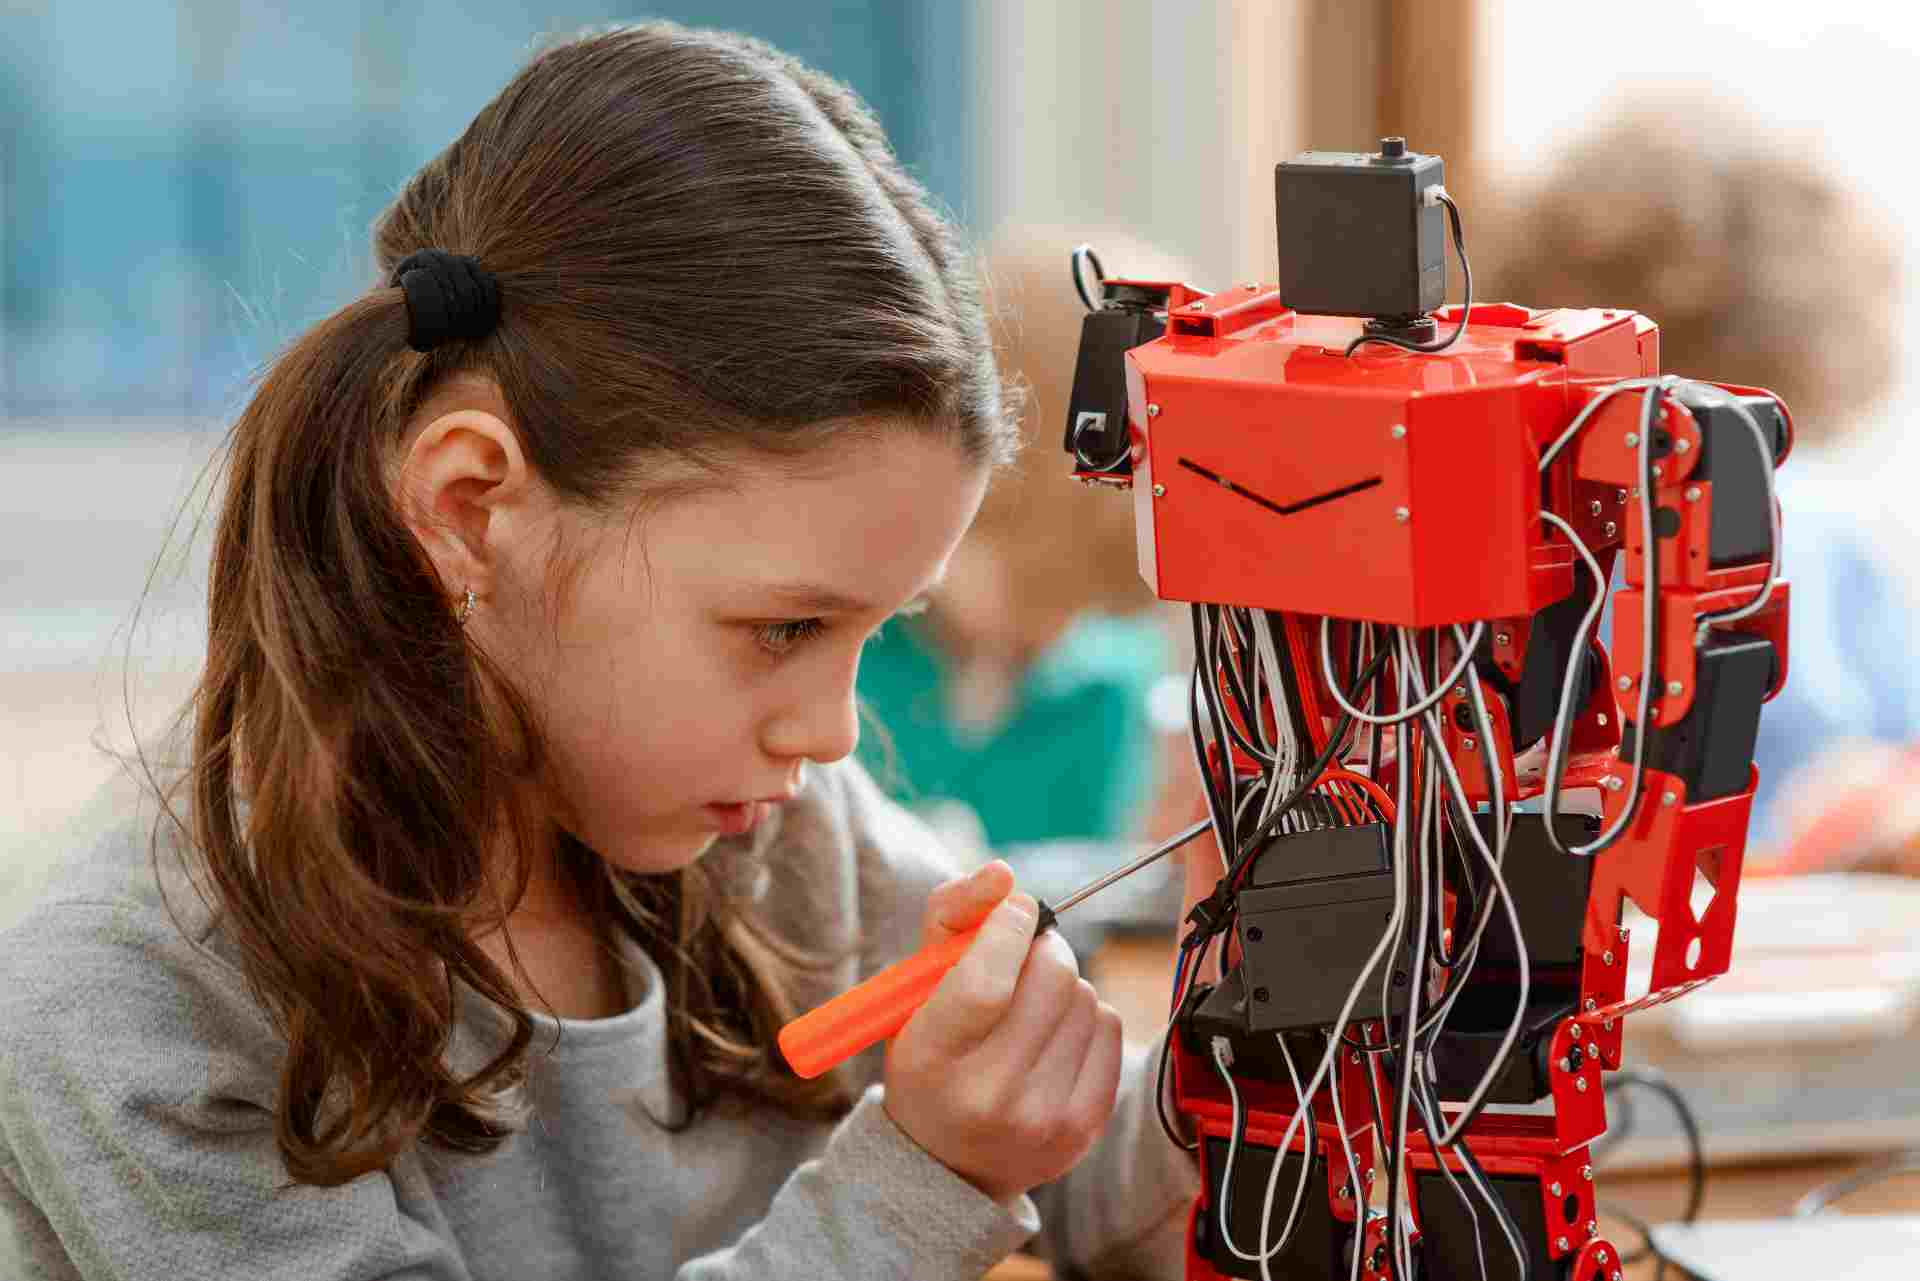 https://moonpreneur.com/wp-content/uploads/2021/05/Humanoid-with-a-child-working-on-creating-the-prototype-wiring-components-shoudl-be-all-around.jpg